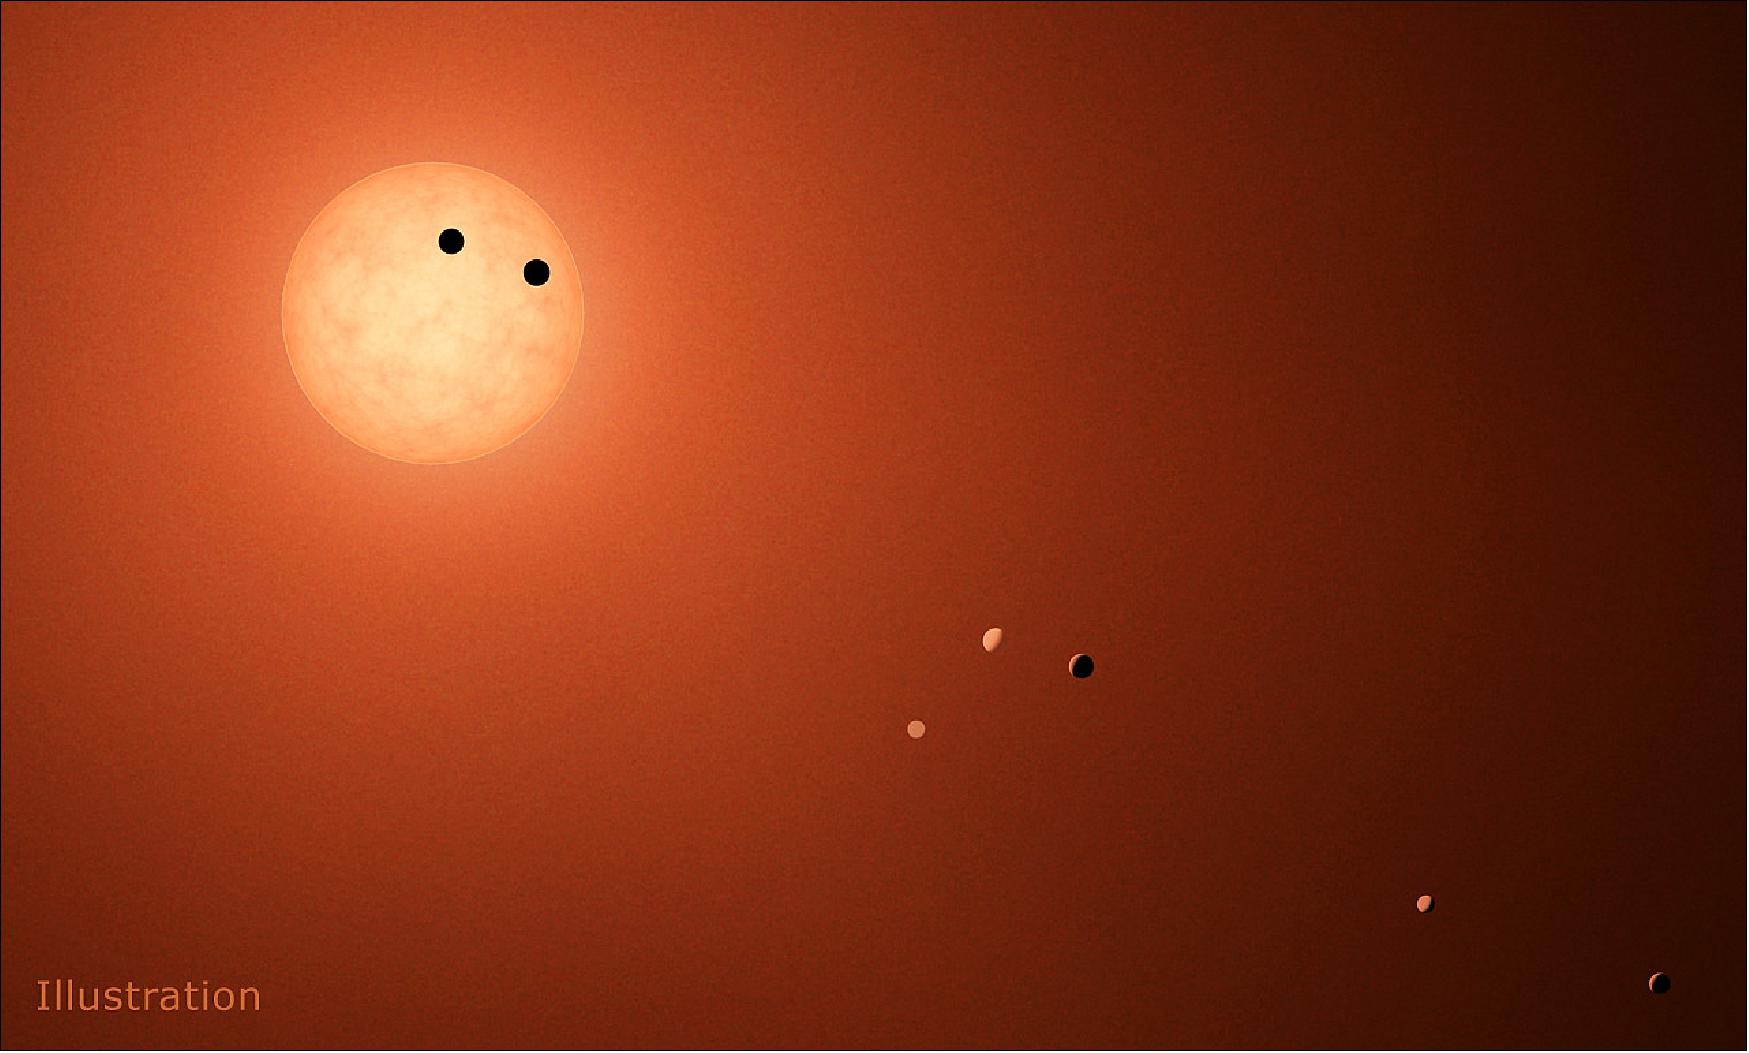 Figure 41: This illustration shows the seven TRAPPIST-1 planets as they might look as viewed from Earth using a fictional, incredibly powerful telescope. (image credit: NASA/JPL-Caltech)